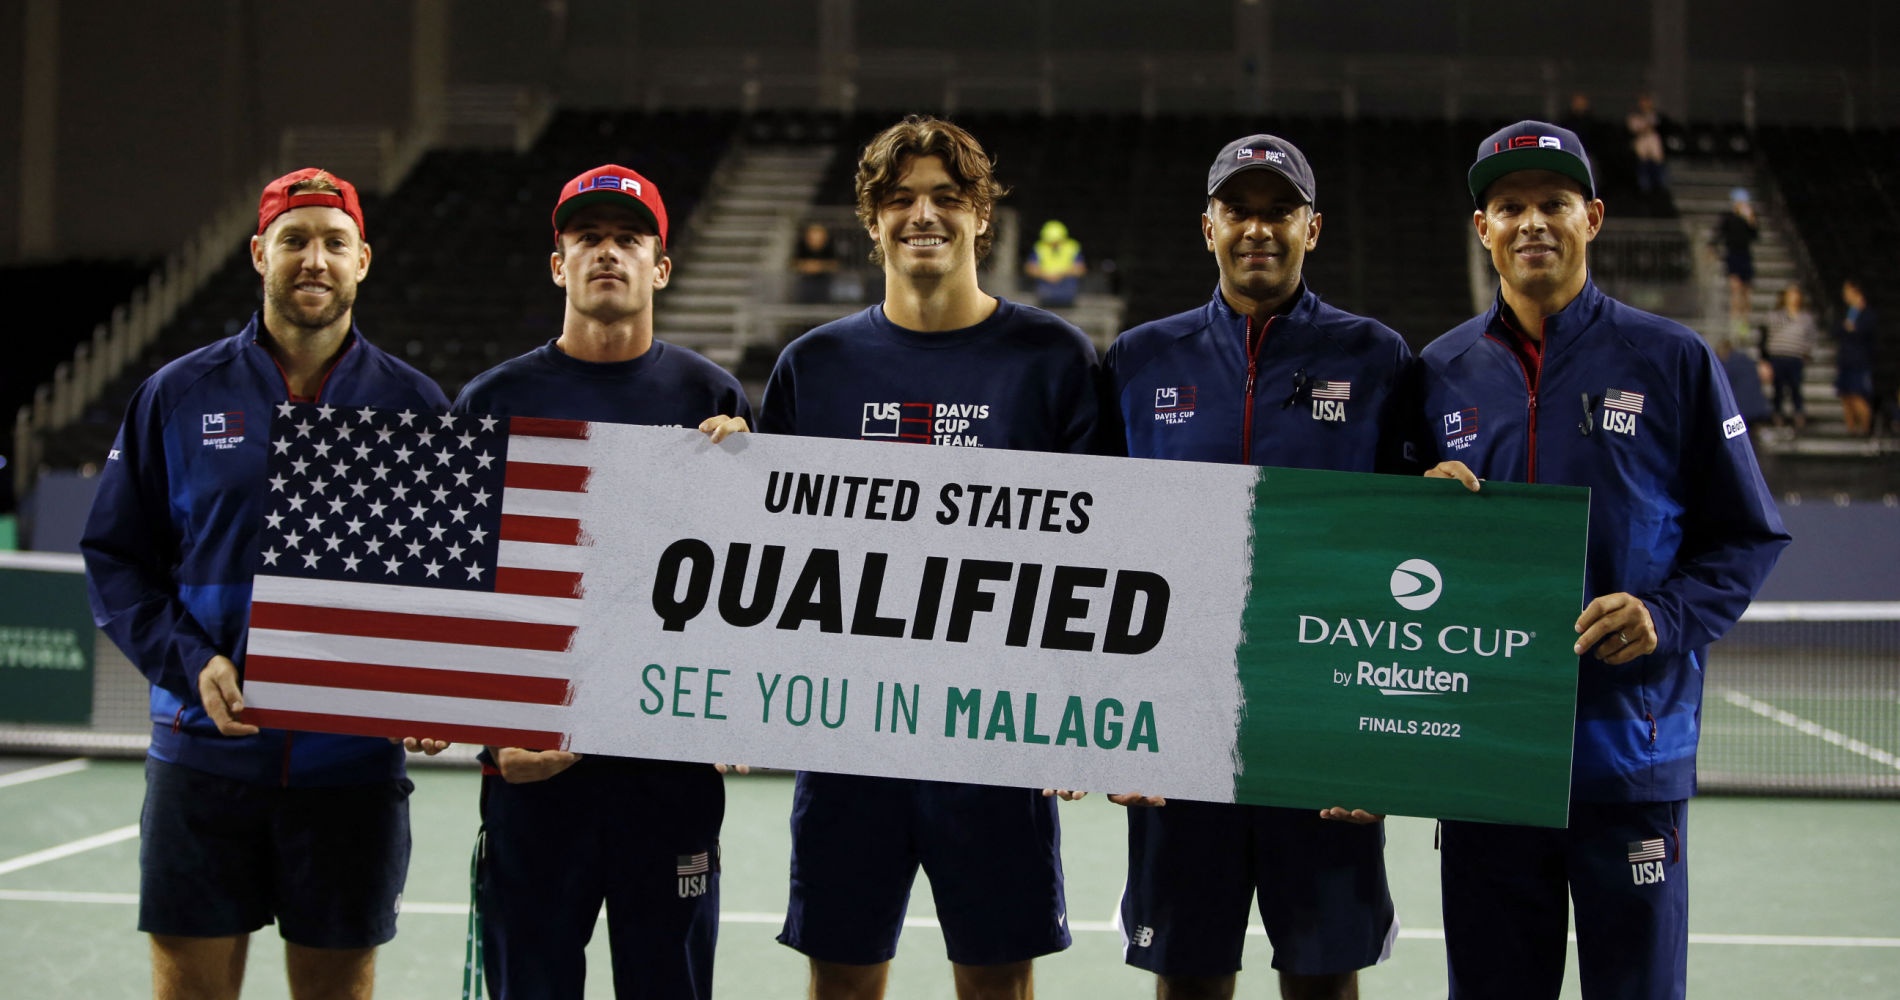 Tennis Fritz, Tiafoe and Paul lead American charge at Davis Cup